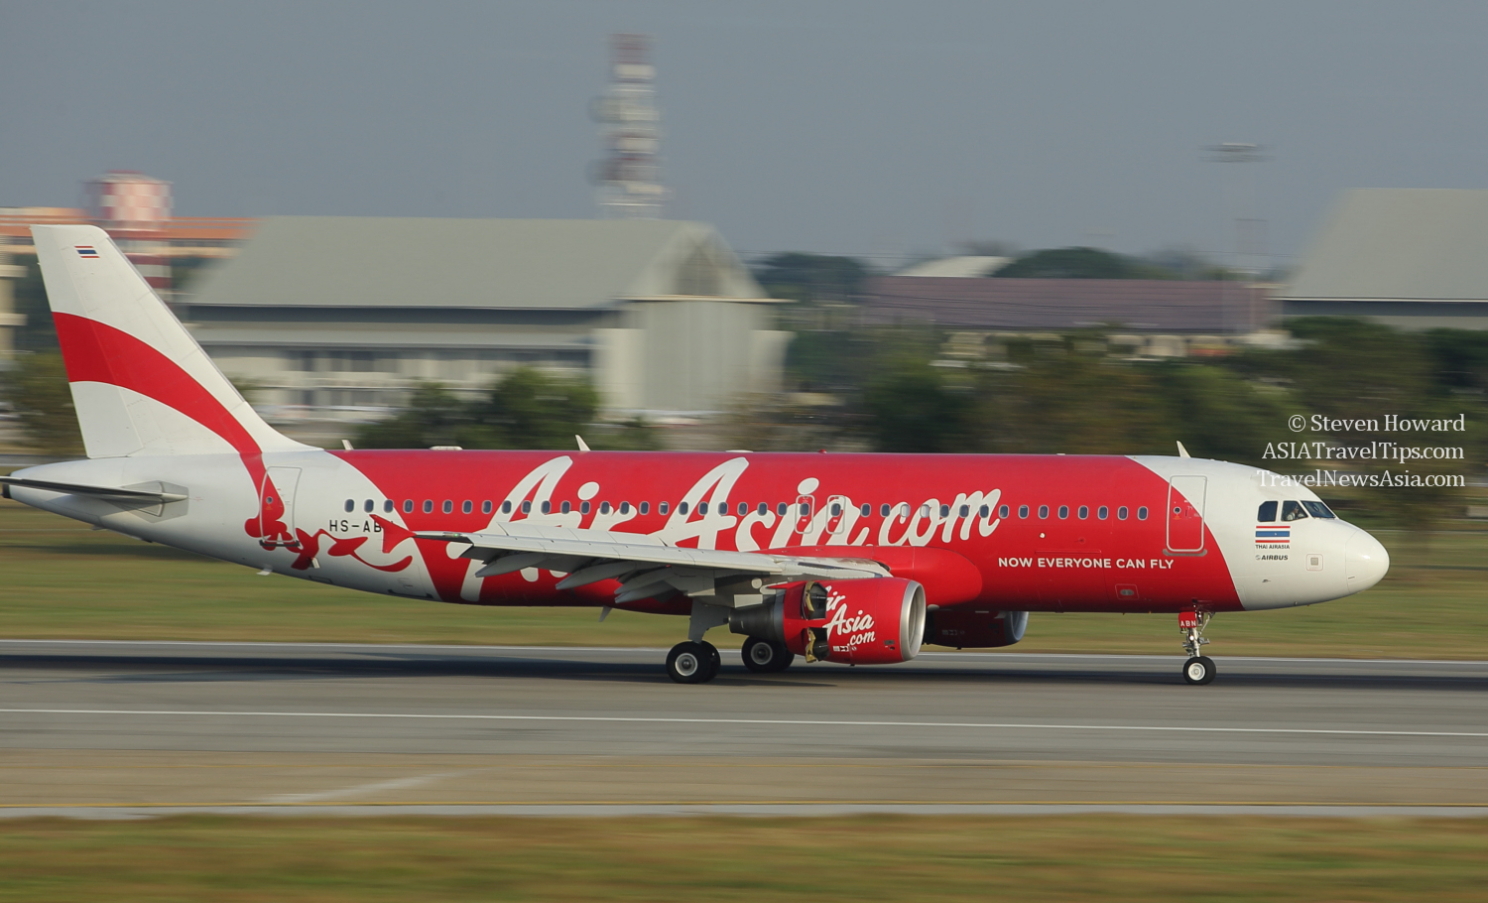 Thai AirAsia A320. Picture by Steven Howard of TravelNewsAsia.com Click to enlarge.